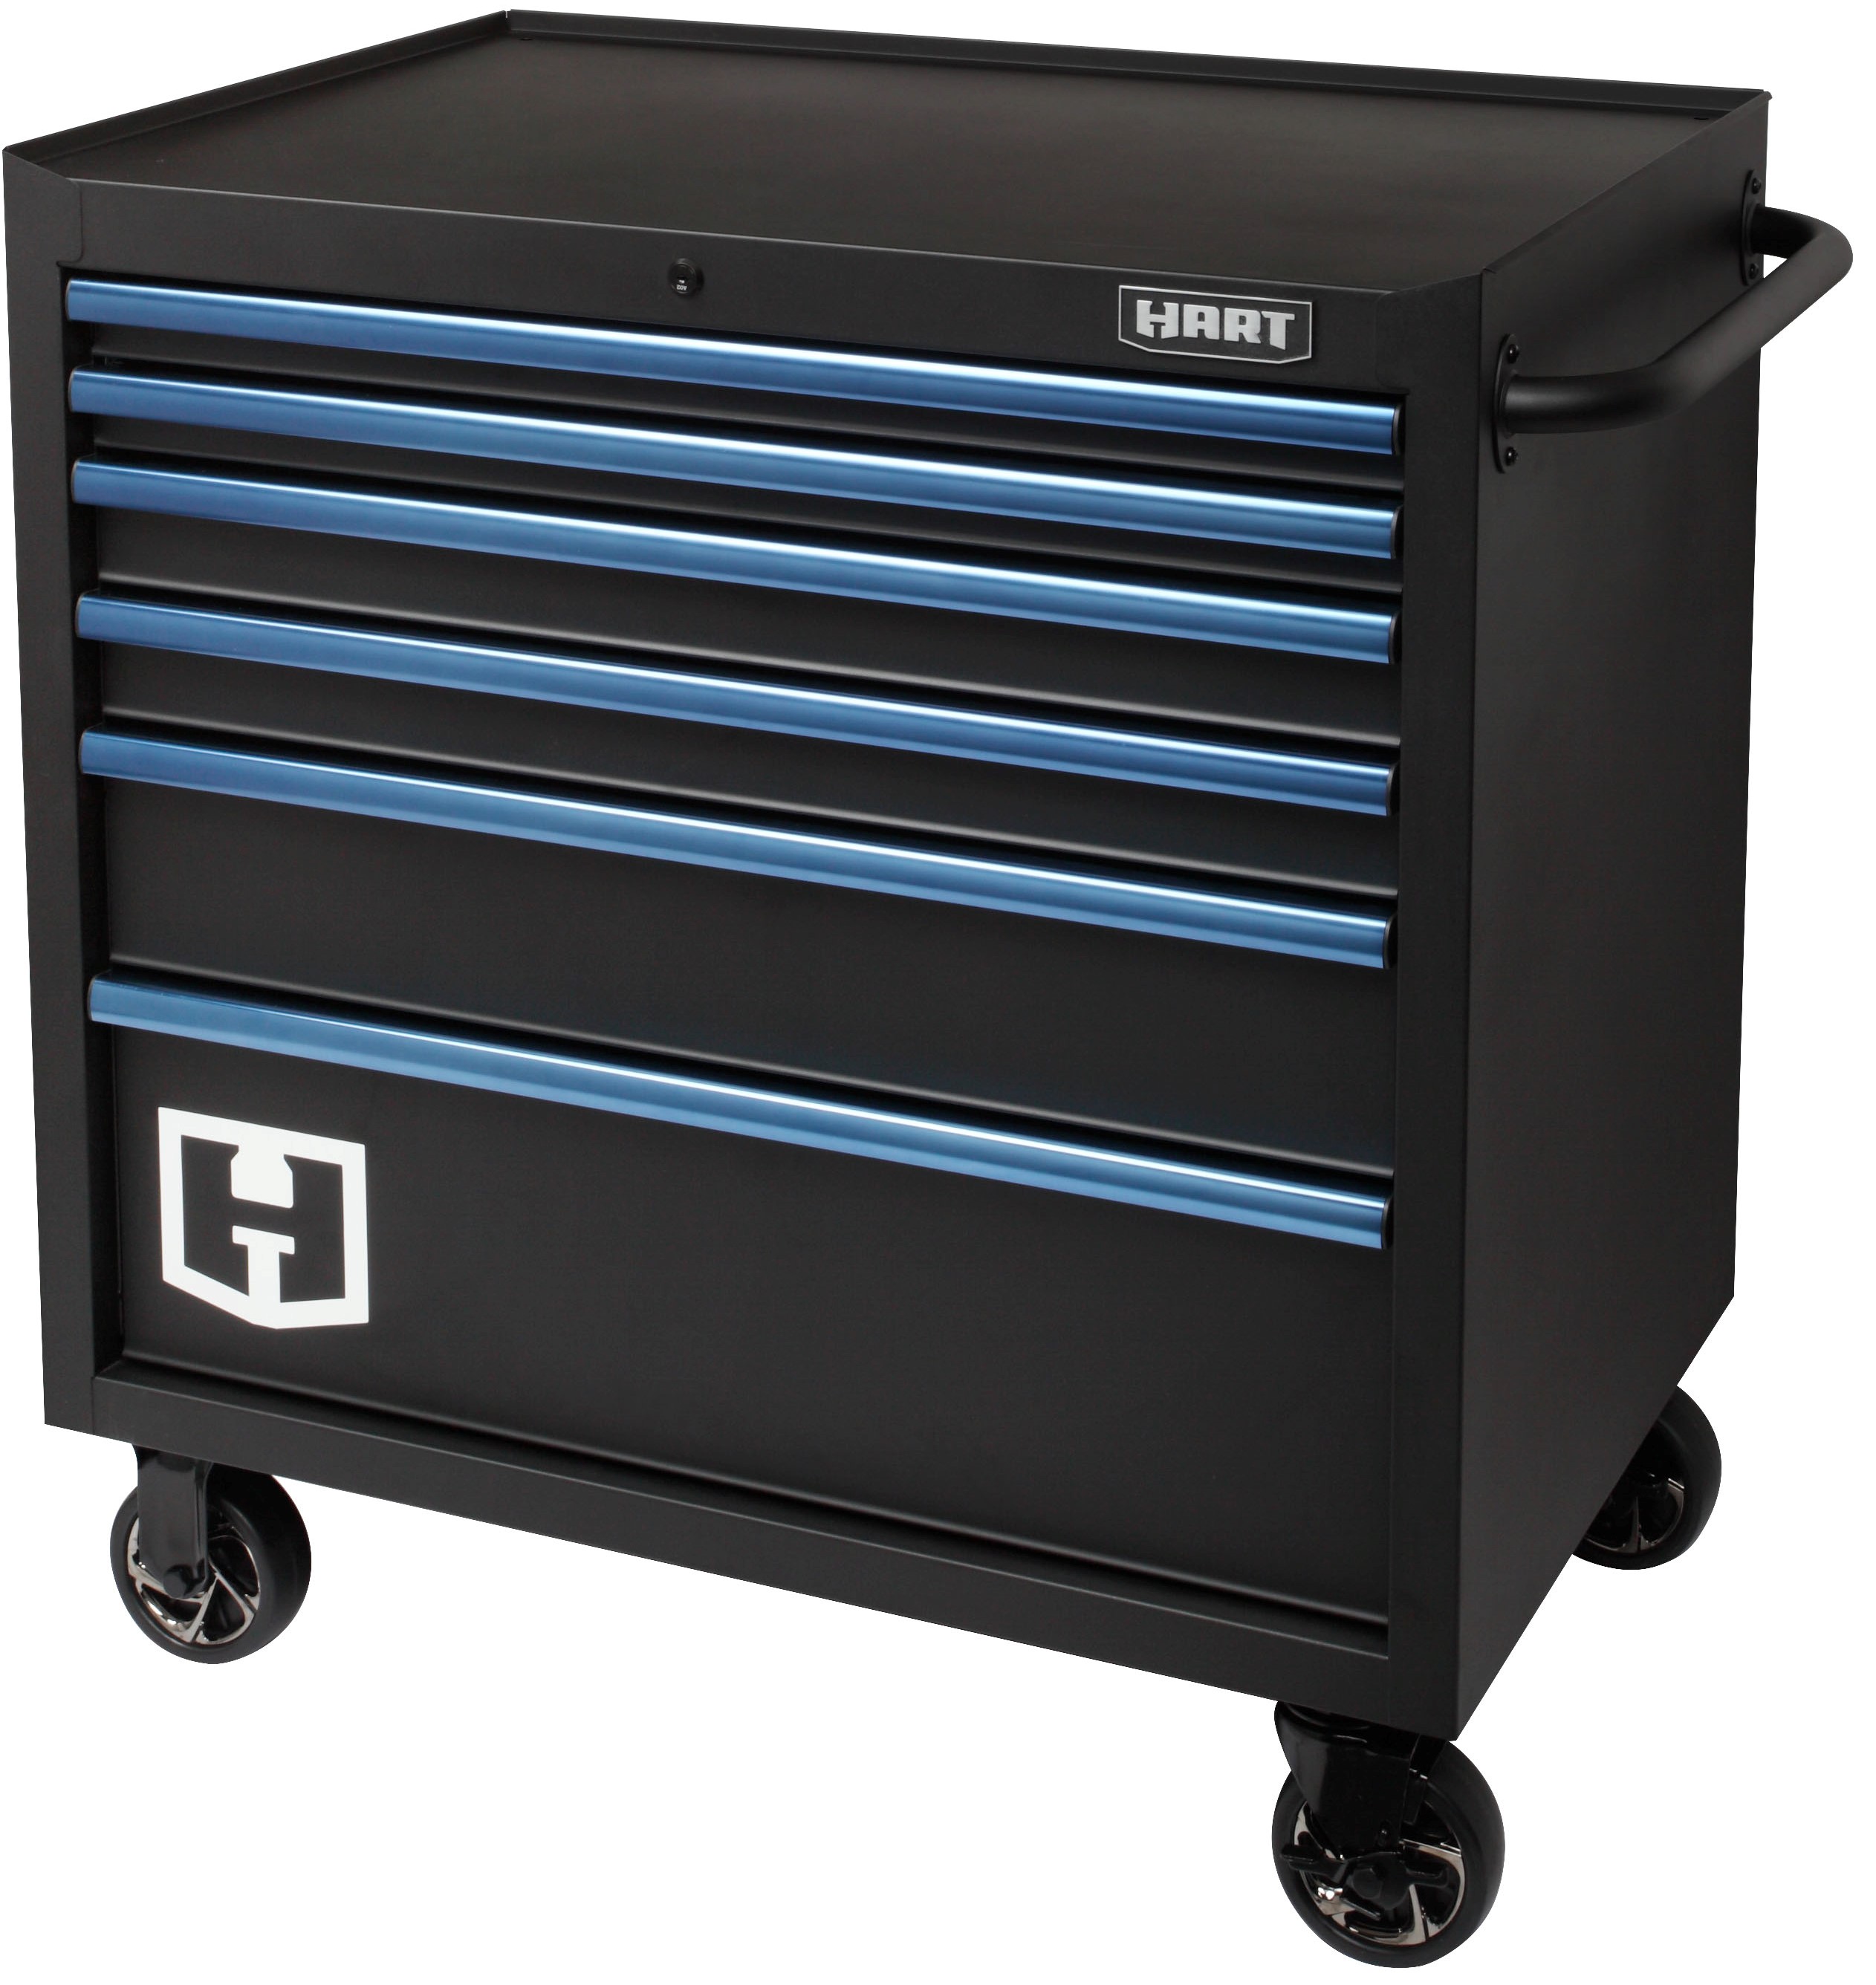 Hart 36-In Wide x 24-In 6-Drawer Rolling Garage Tool Cabinet, HART36TR6XD - image 1 of 7